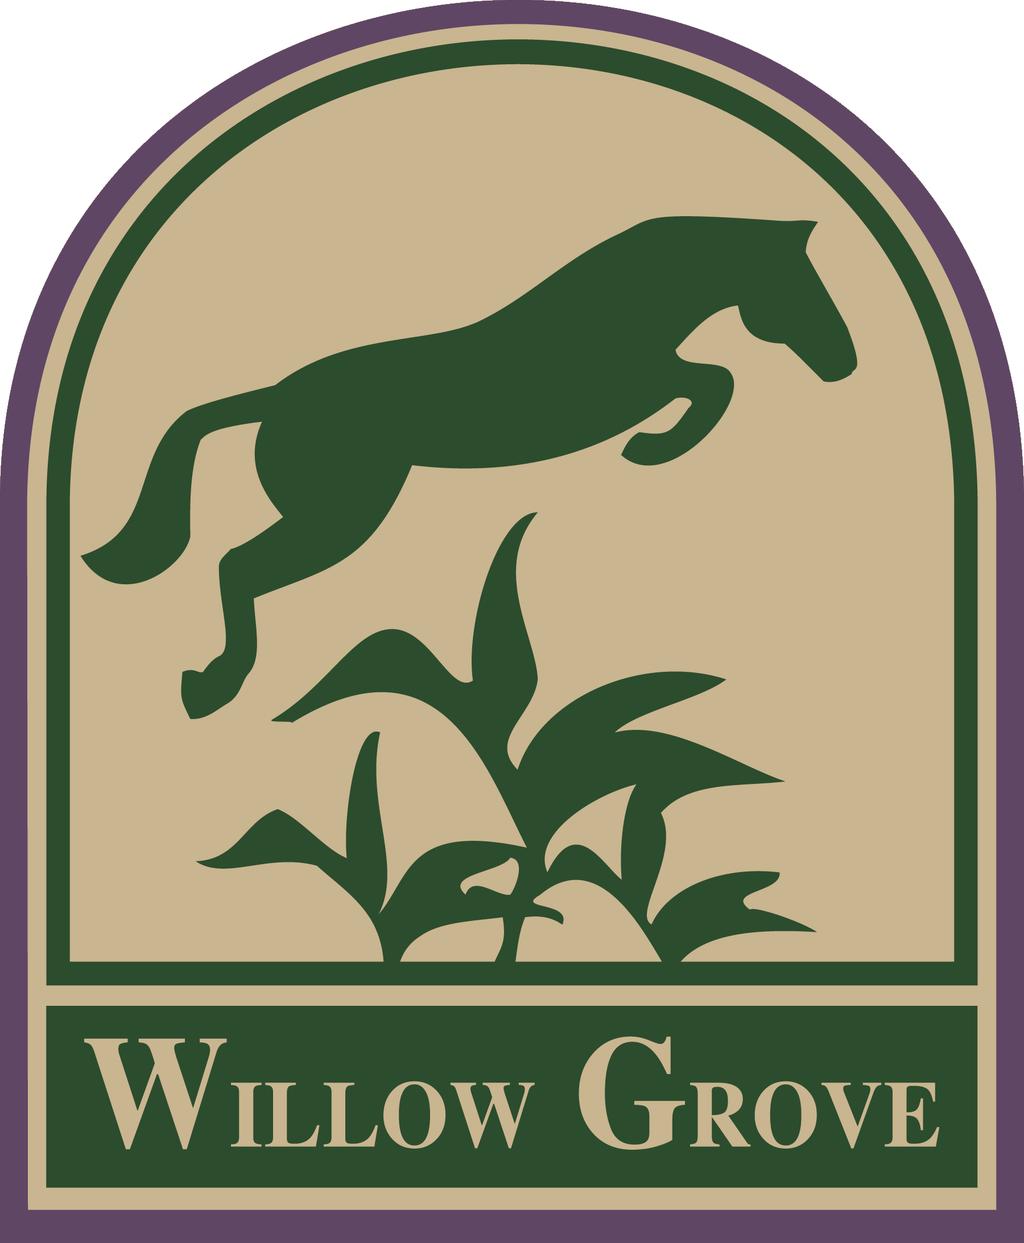 Like Willow Grove Stables & Two Willows Equine Development